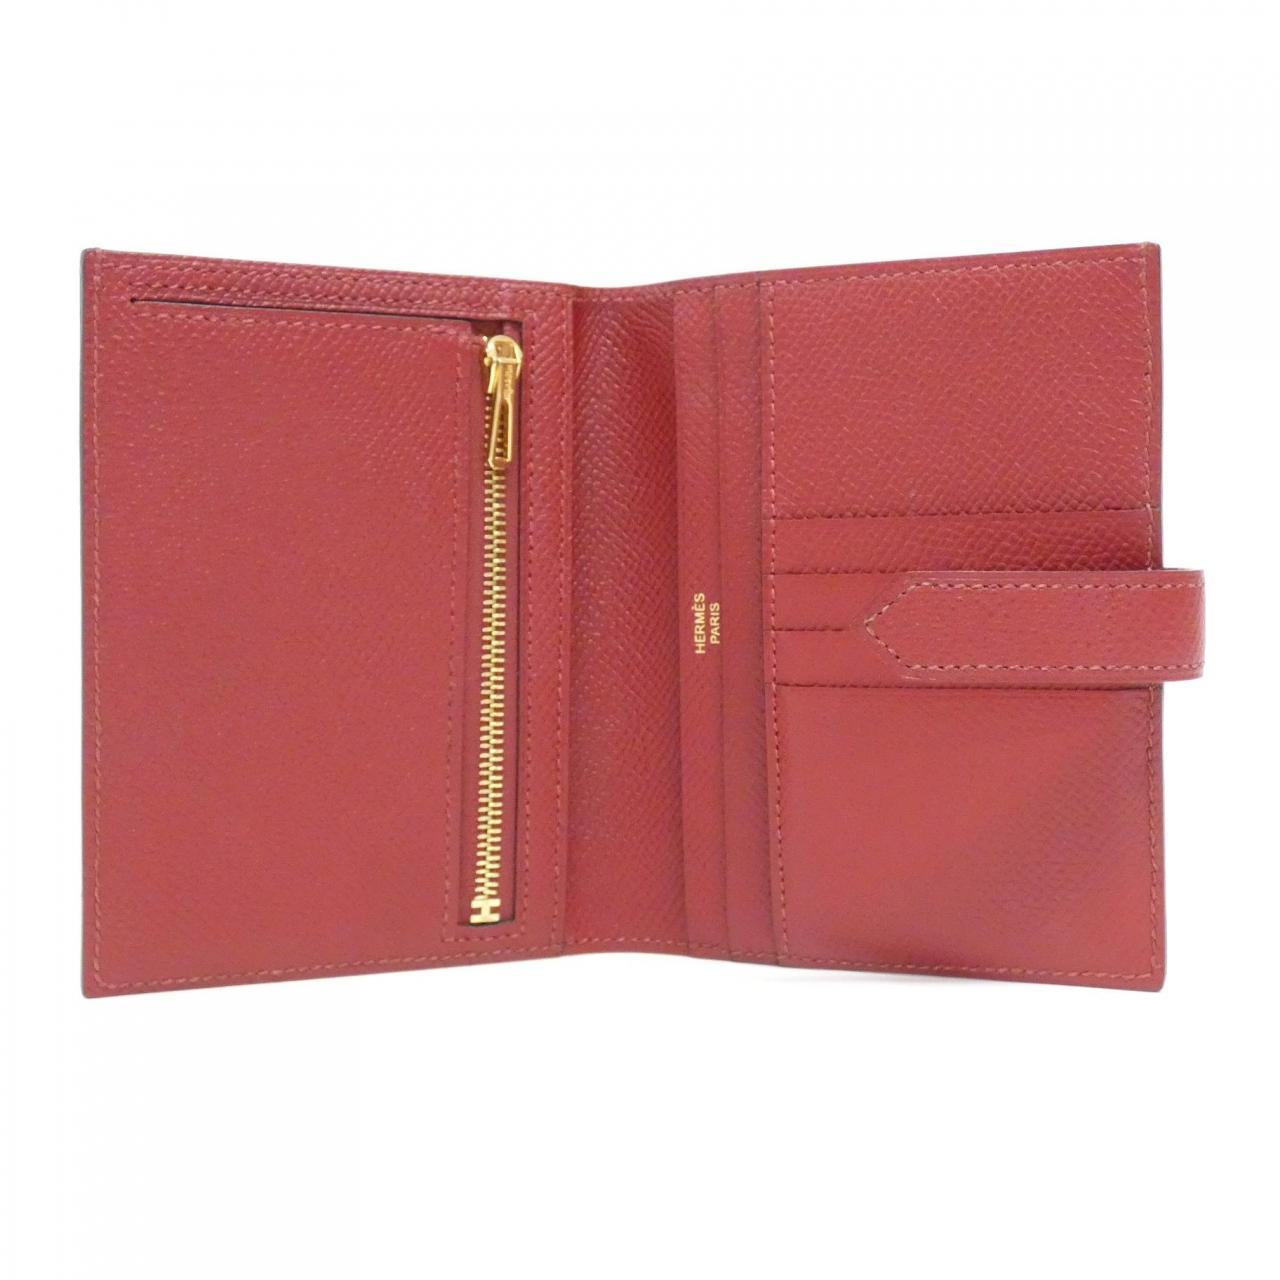 HERMES Bearn Compact 039790CP Wallet